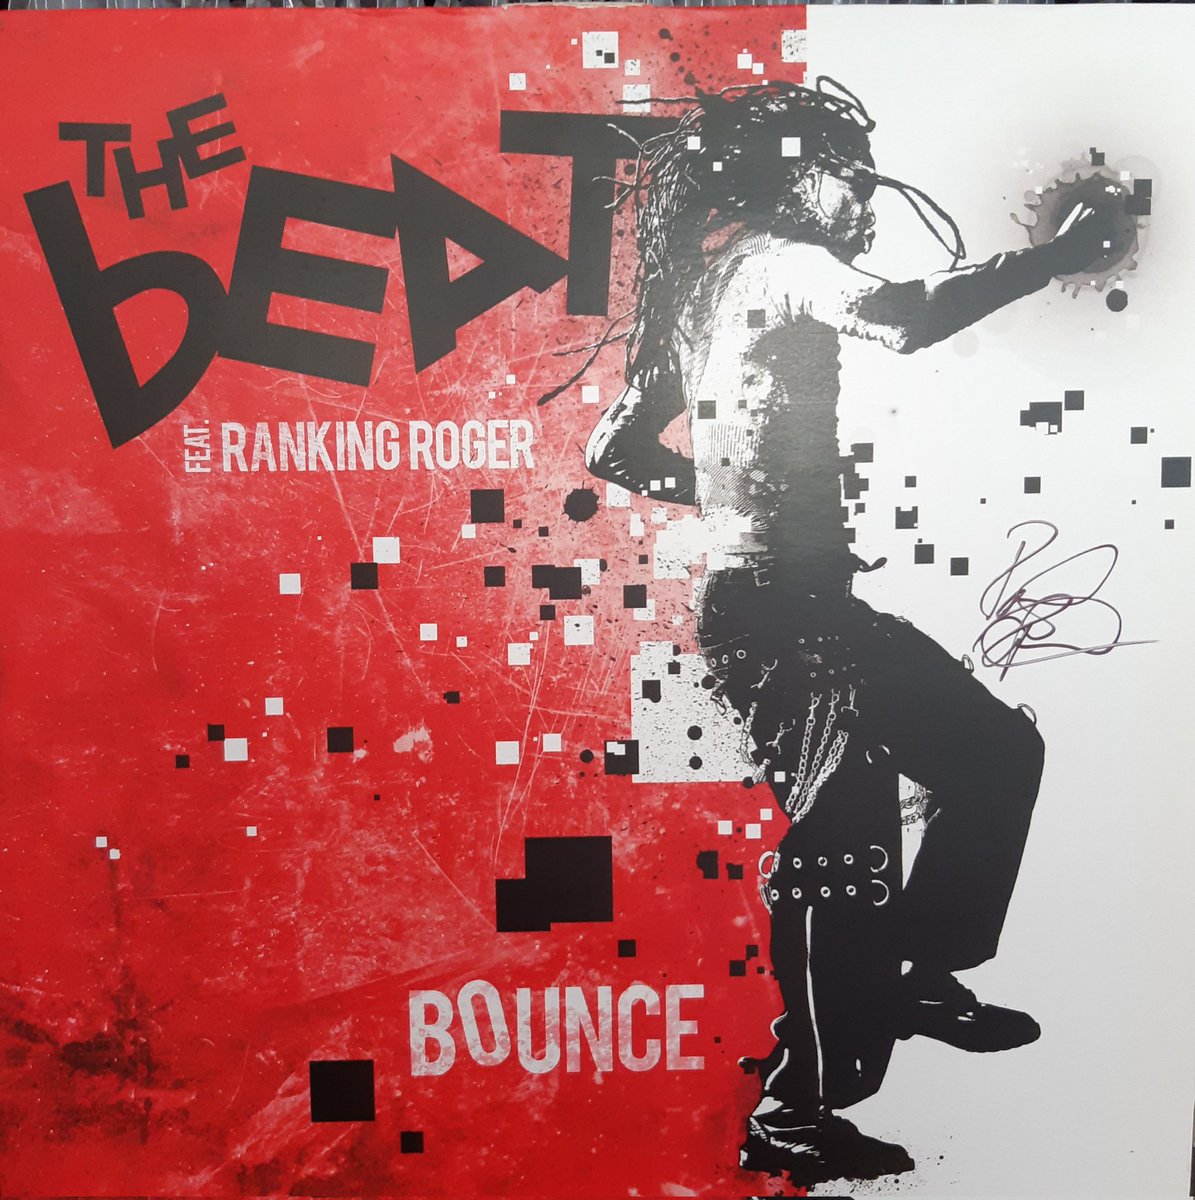 #TheBeat featuring #RankingRoger released #Bounce in 2016, the album also features #RankingJunior a great album, #RockSolidAlbumADay2023 keep your feet movin' and have a brilliant day